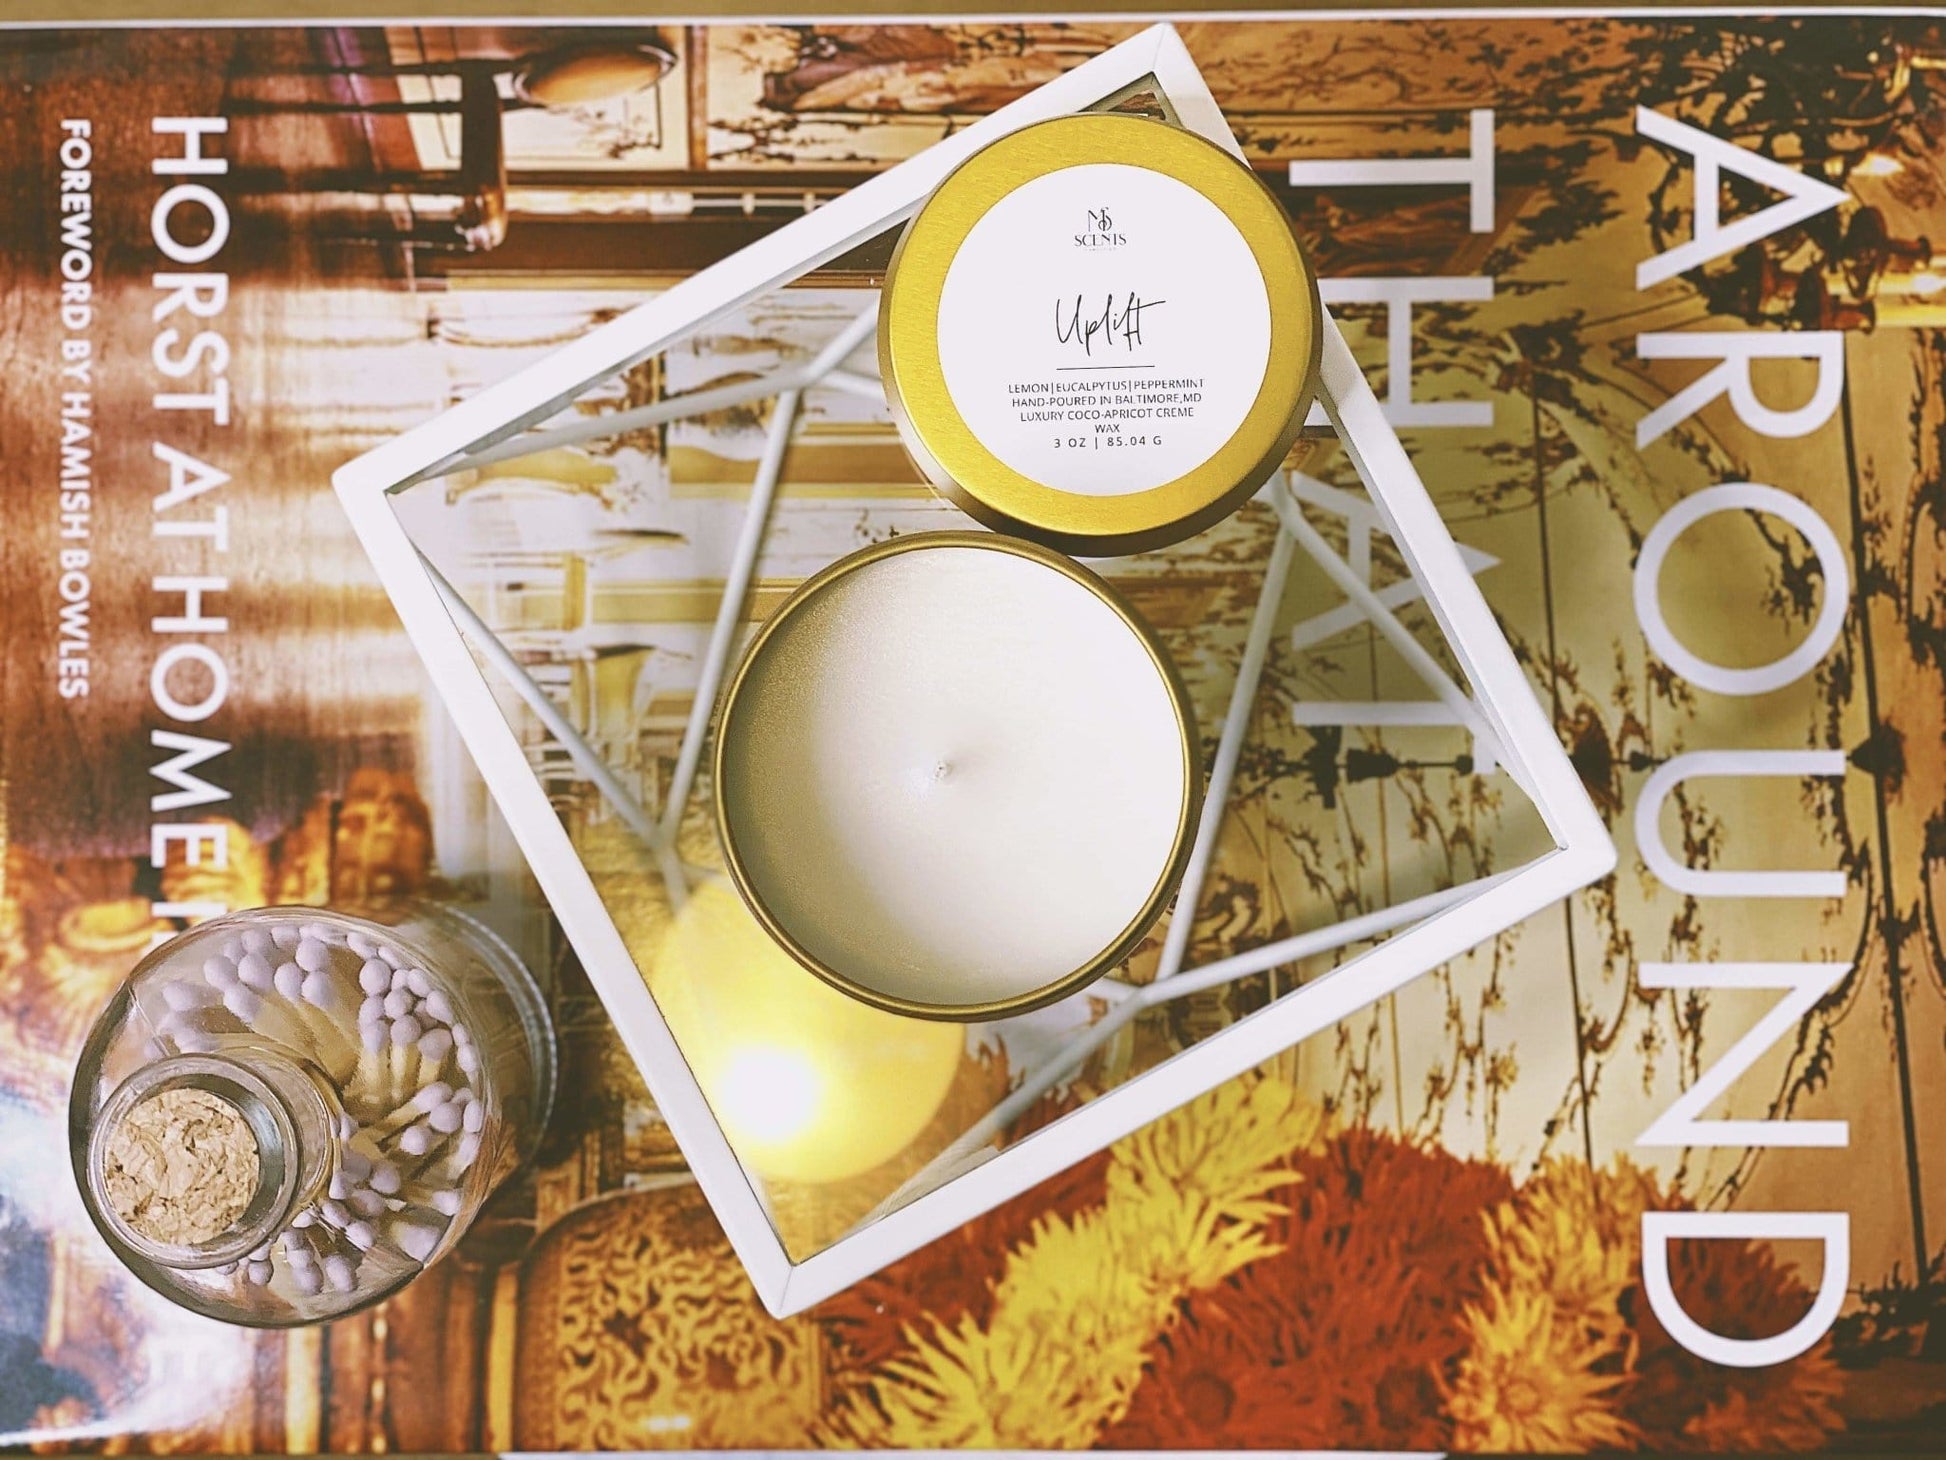 Uplift - MS Scents Candle Co.